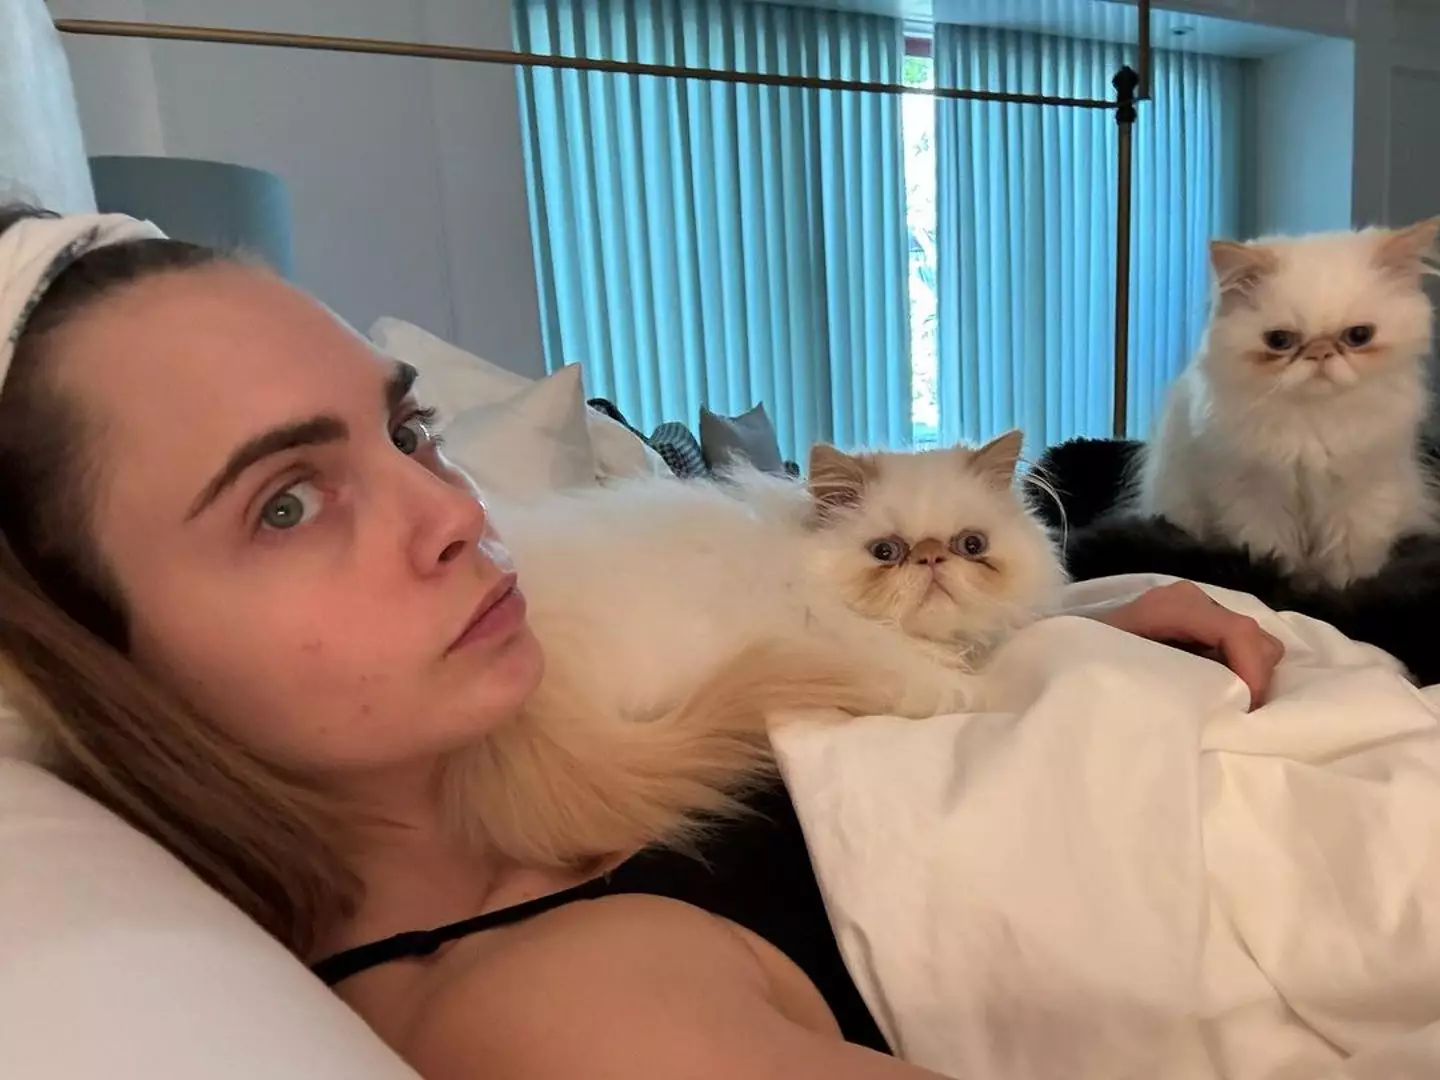 The 31-year-old has clearly had a lot to deal with. (Instagram/@caradelevingne)